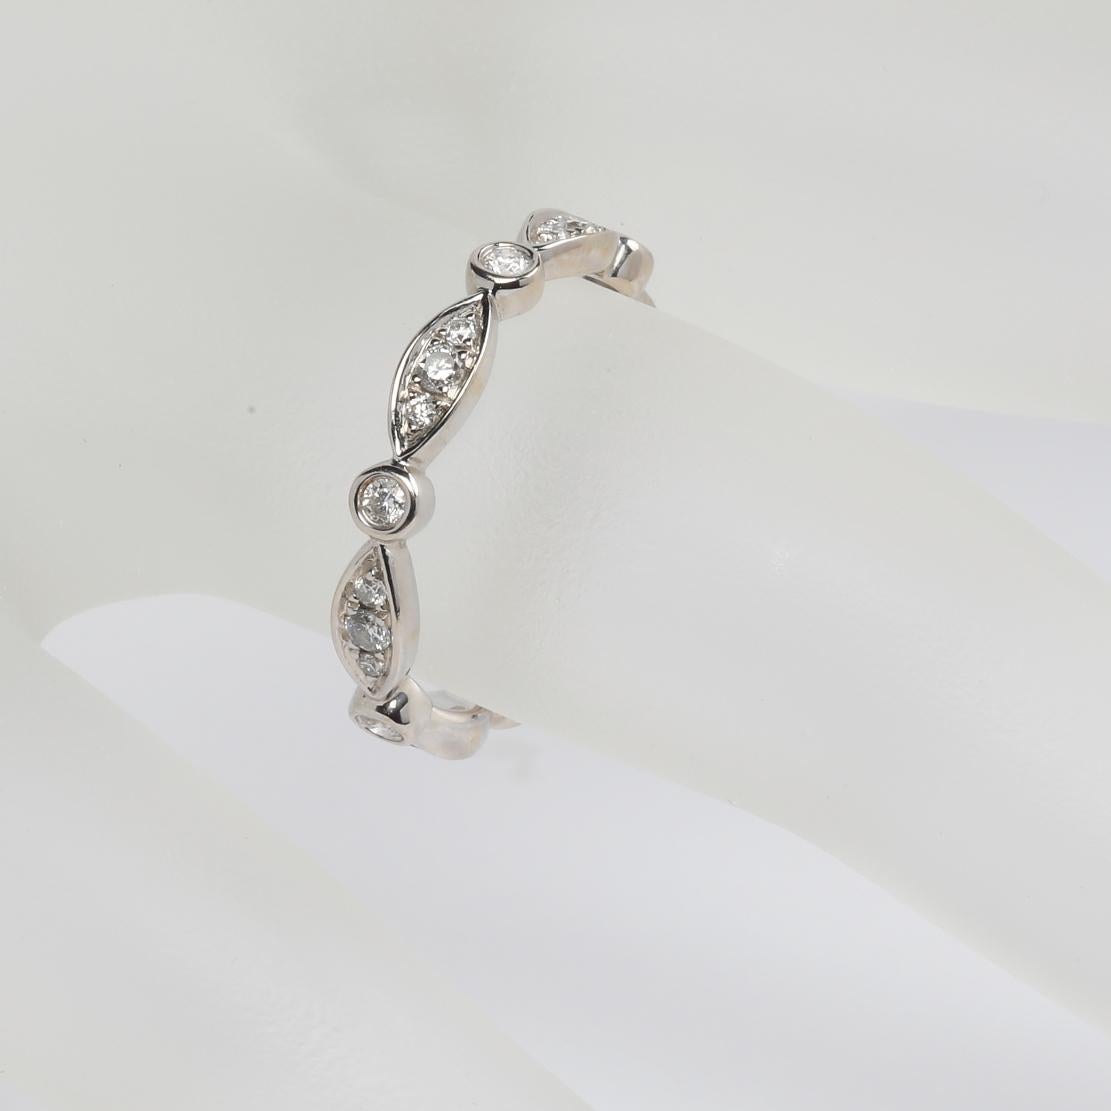 Beautiful Stackable Bezel Set Diamond Wedding Band Ring, featuring:
✧ Prong set natural diamonds weighing 0.45 tcw  (F-G color, VS clarity) 
✧ Approximately 2.60 grams of 18K White Gold
✧ Free appraisal included with your purchase
✧ Comes with